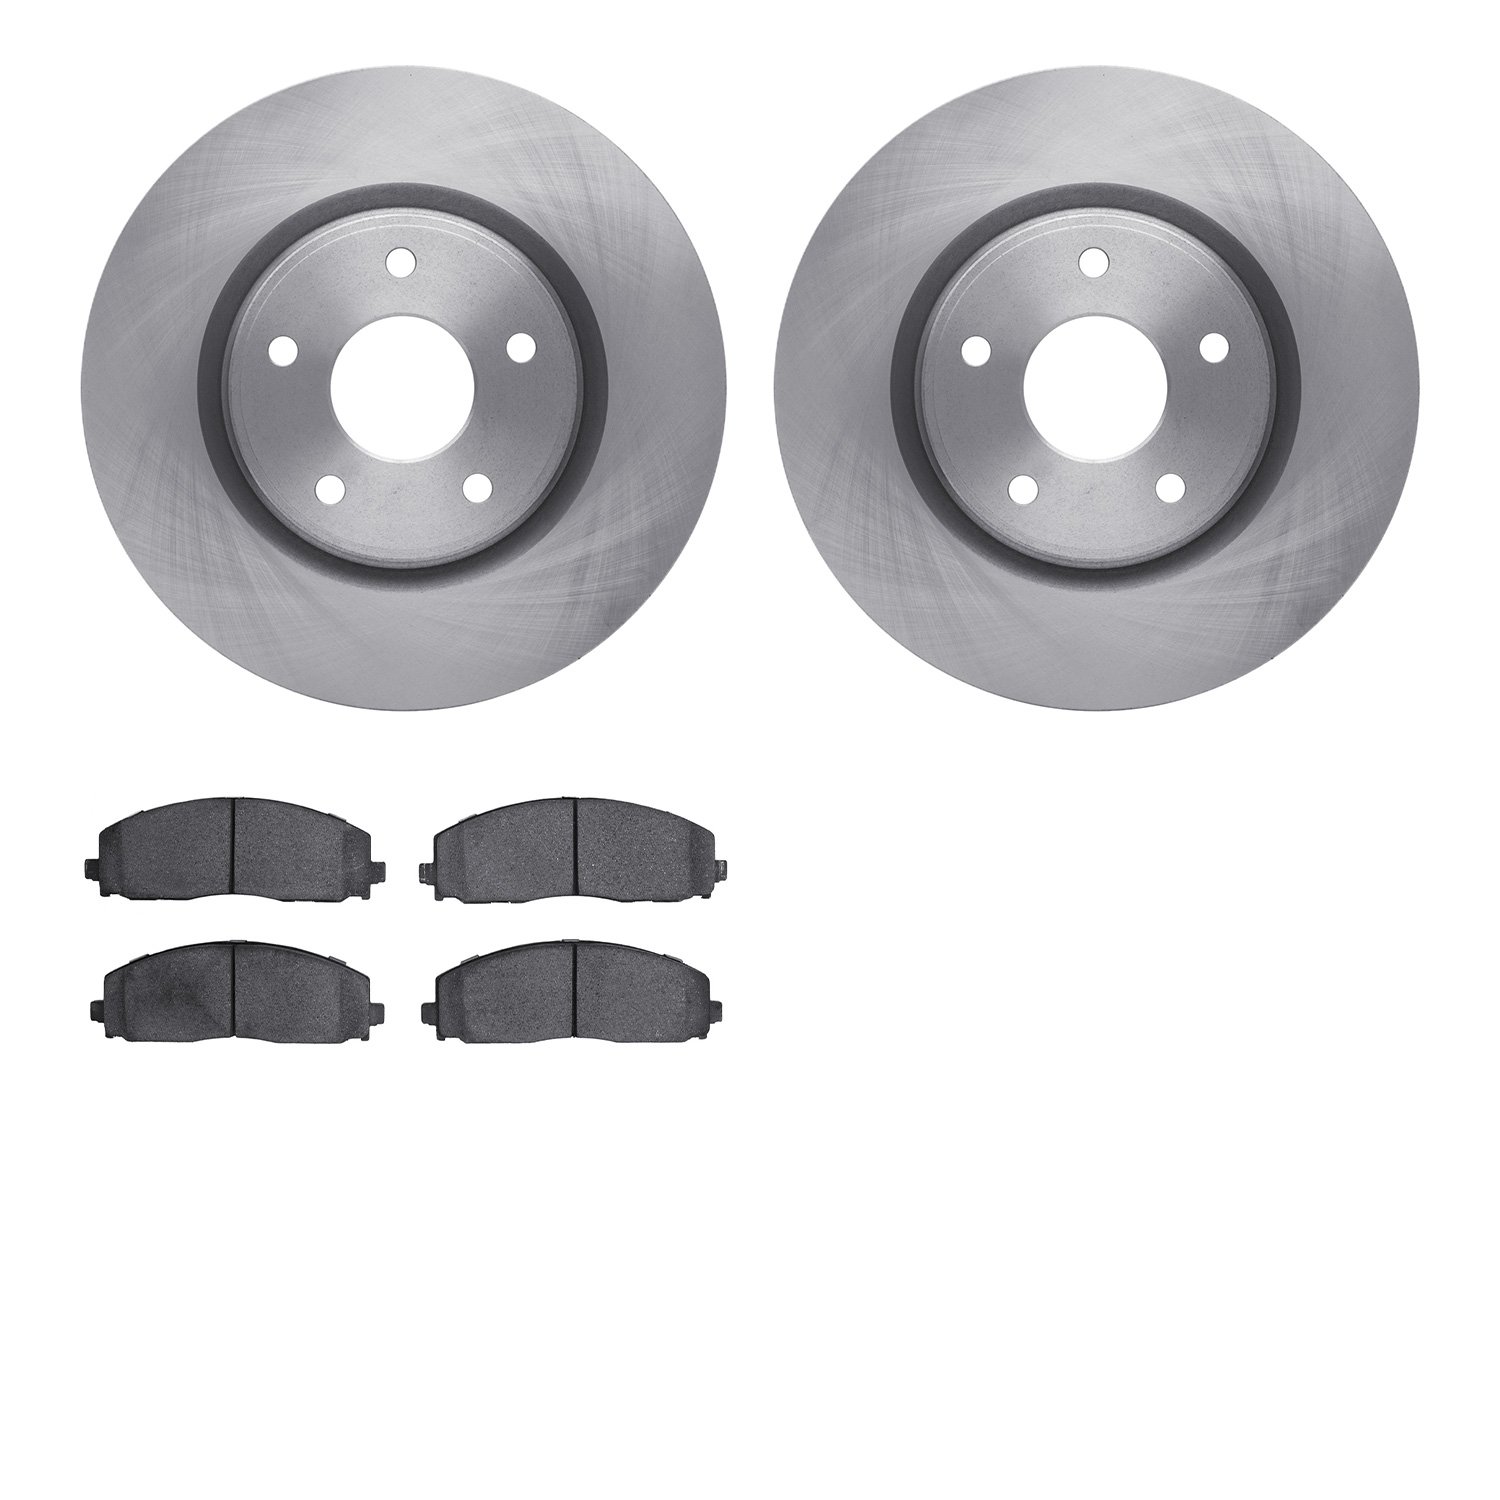 6302-40096 Brake Rotors with 3000-Series Ceramic Brake Pads Kit, Fits Select Multiple Makes/Models, Position: Front